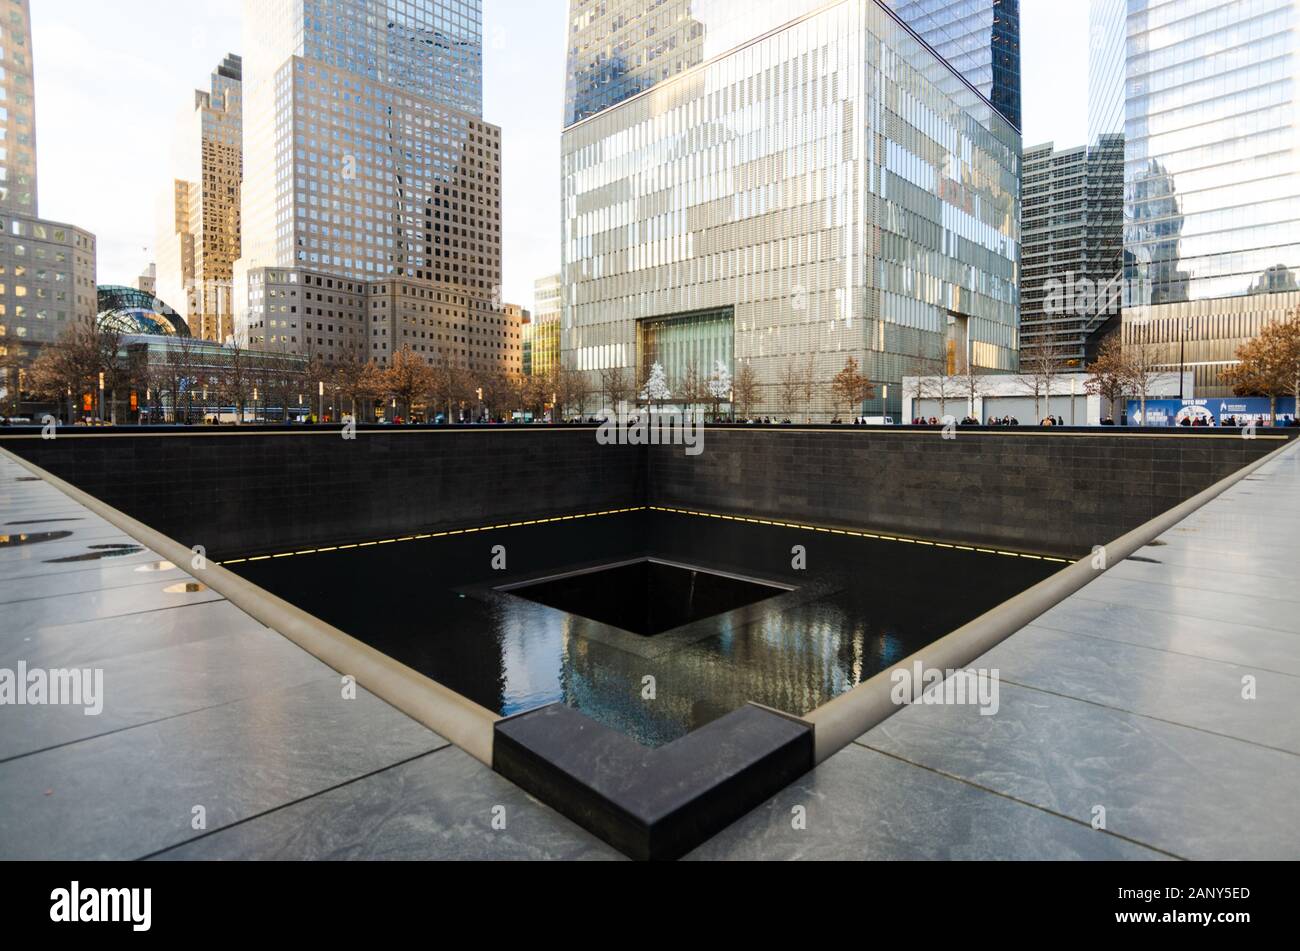 11 septembre 9/11 Memorial Infinity Waterfall Pool par le World Trade Center à New York City Banque D'Images